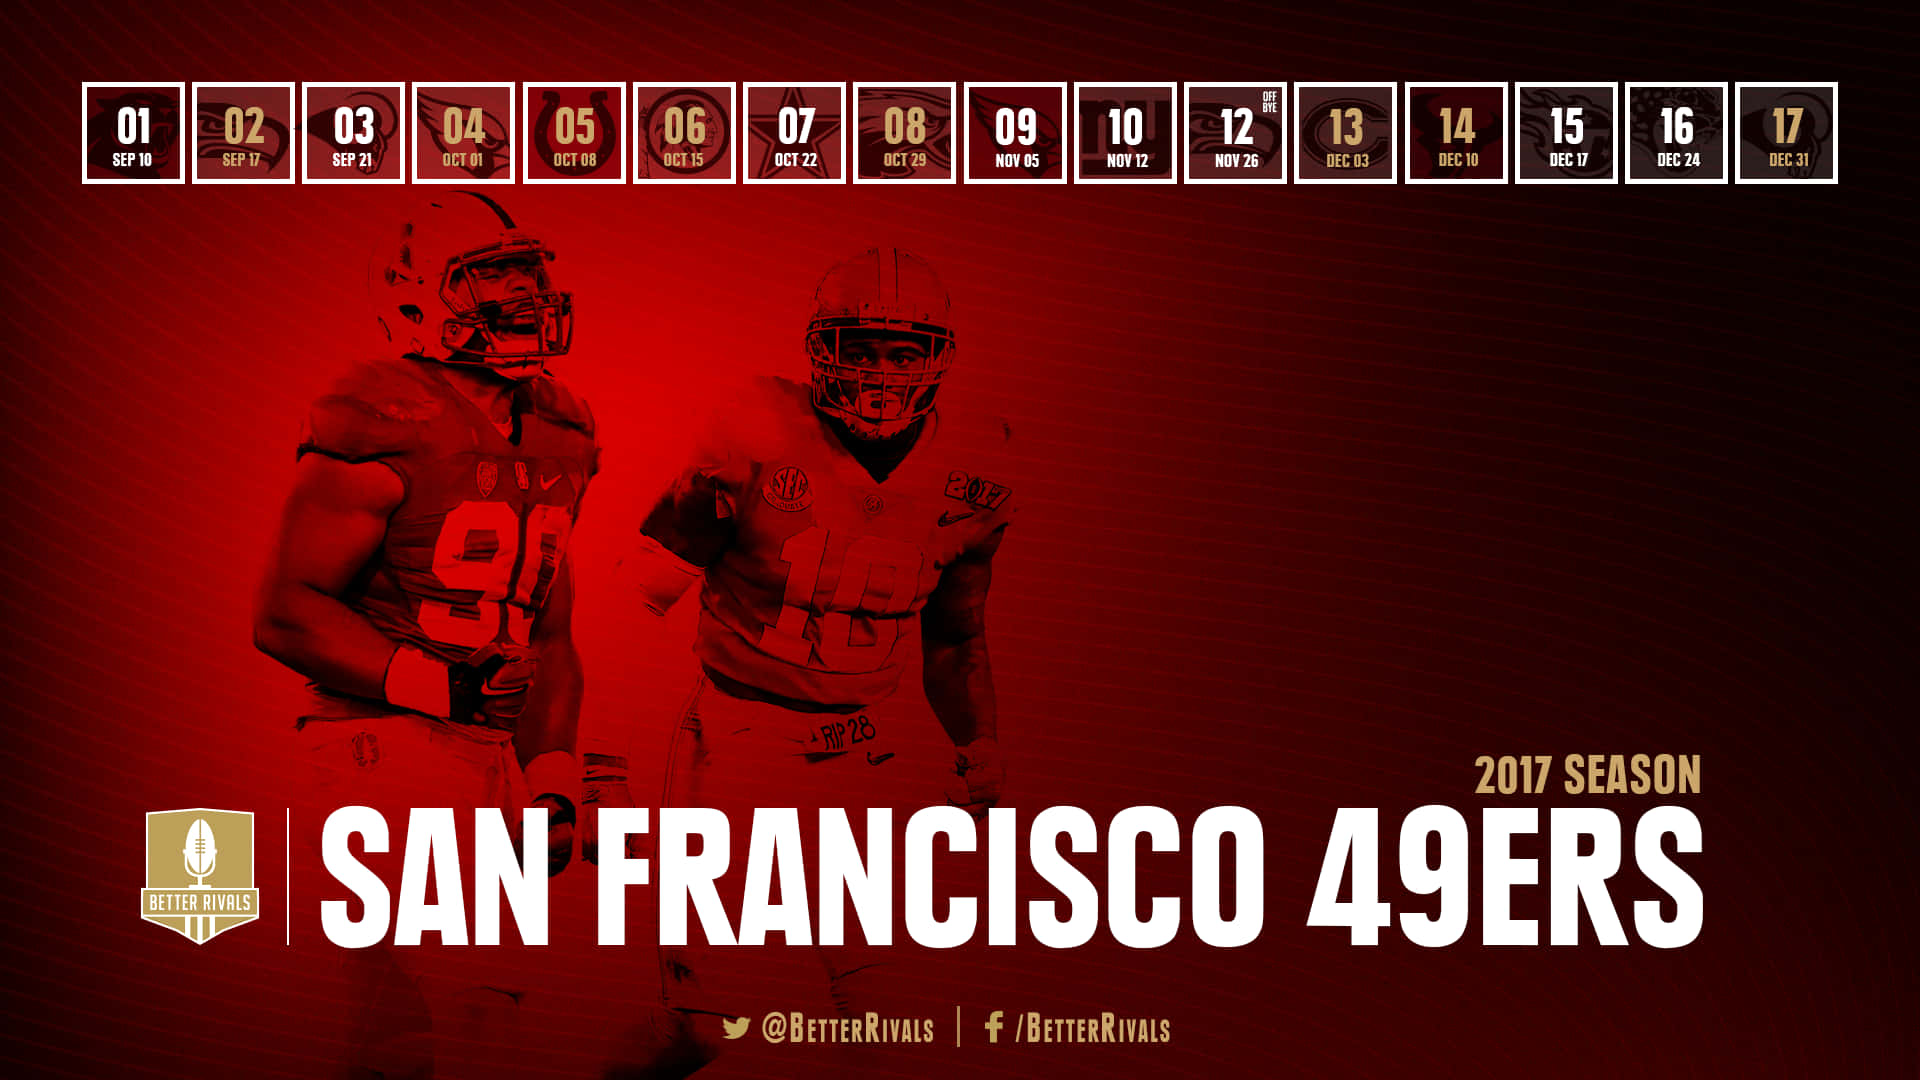 Rally Together and Show Your Support for the San Francisco 49ers